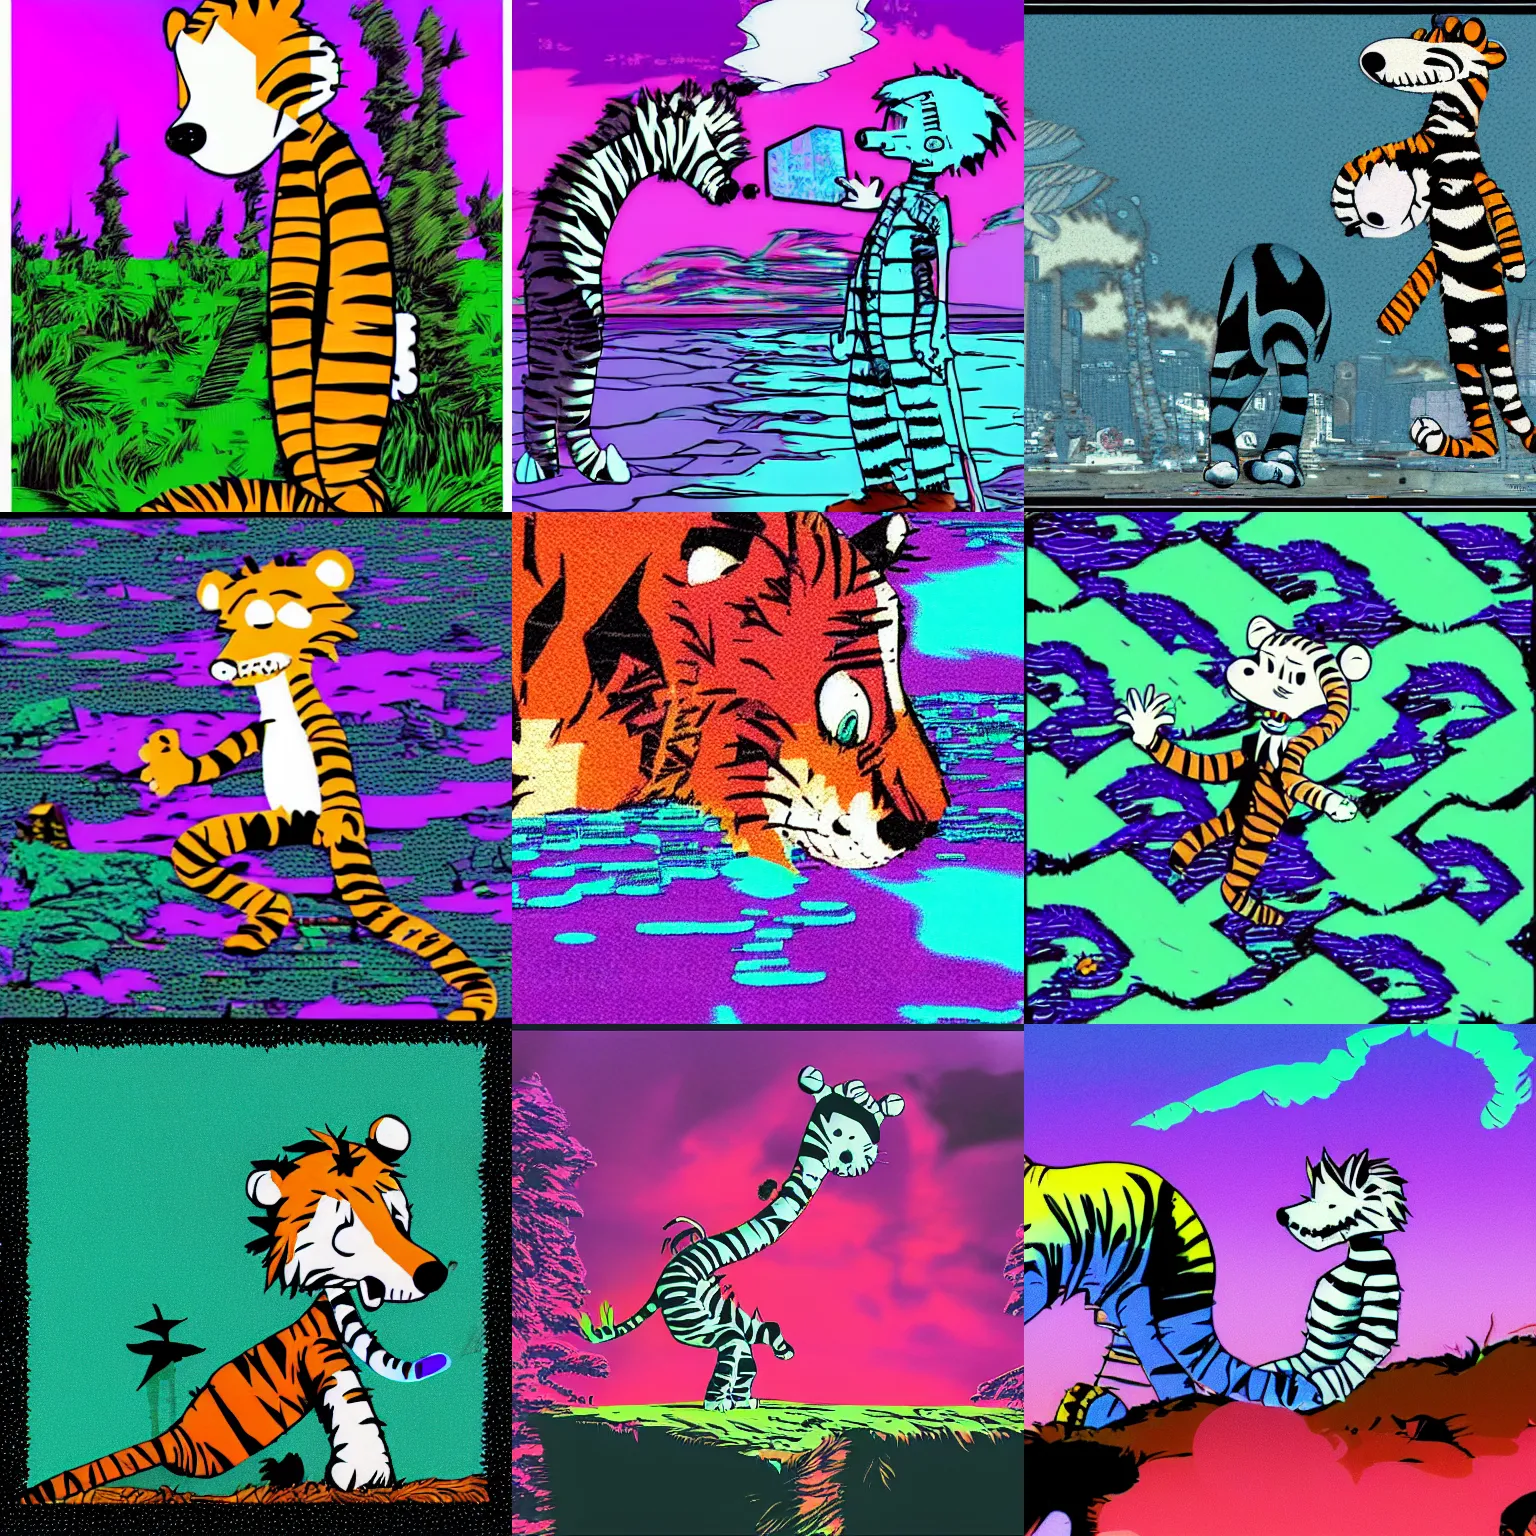 Prompt: Calvin and Hobbes glitch art vaporwave